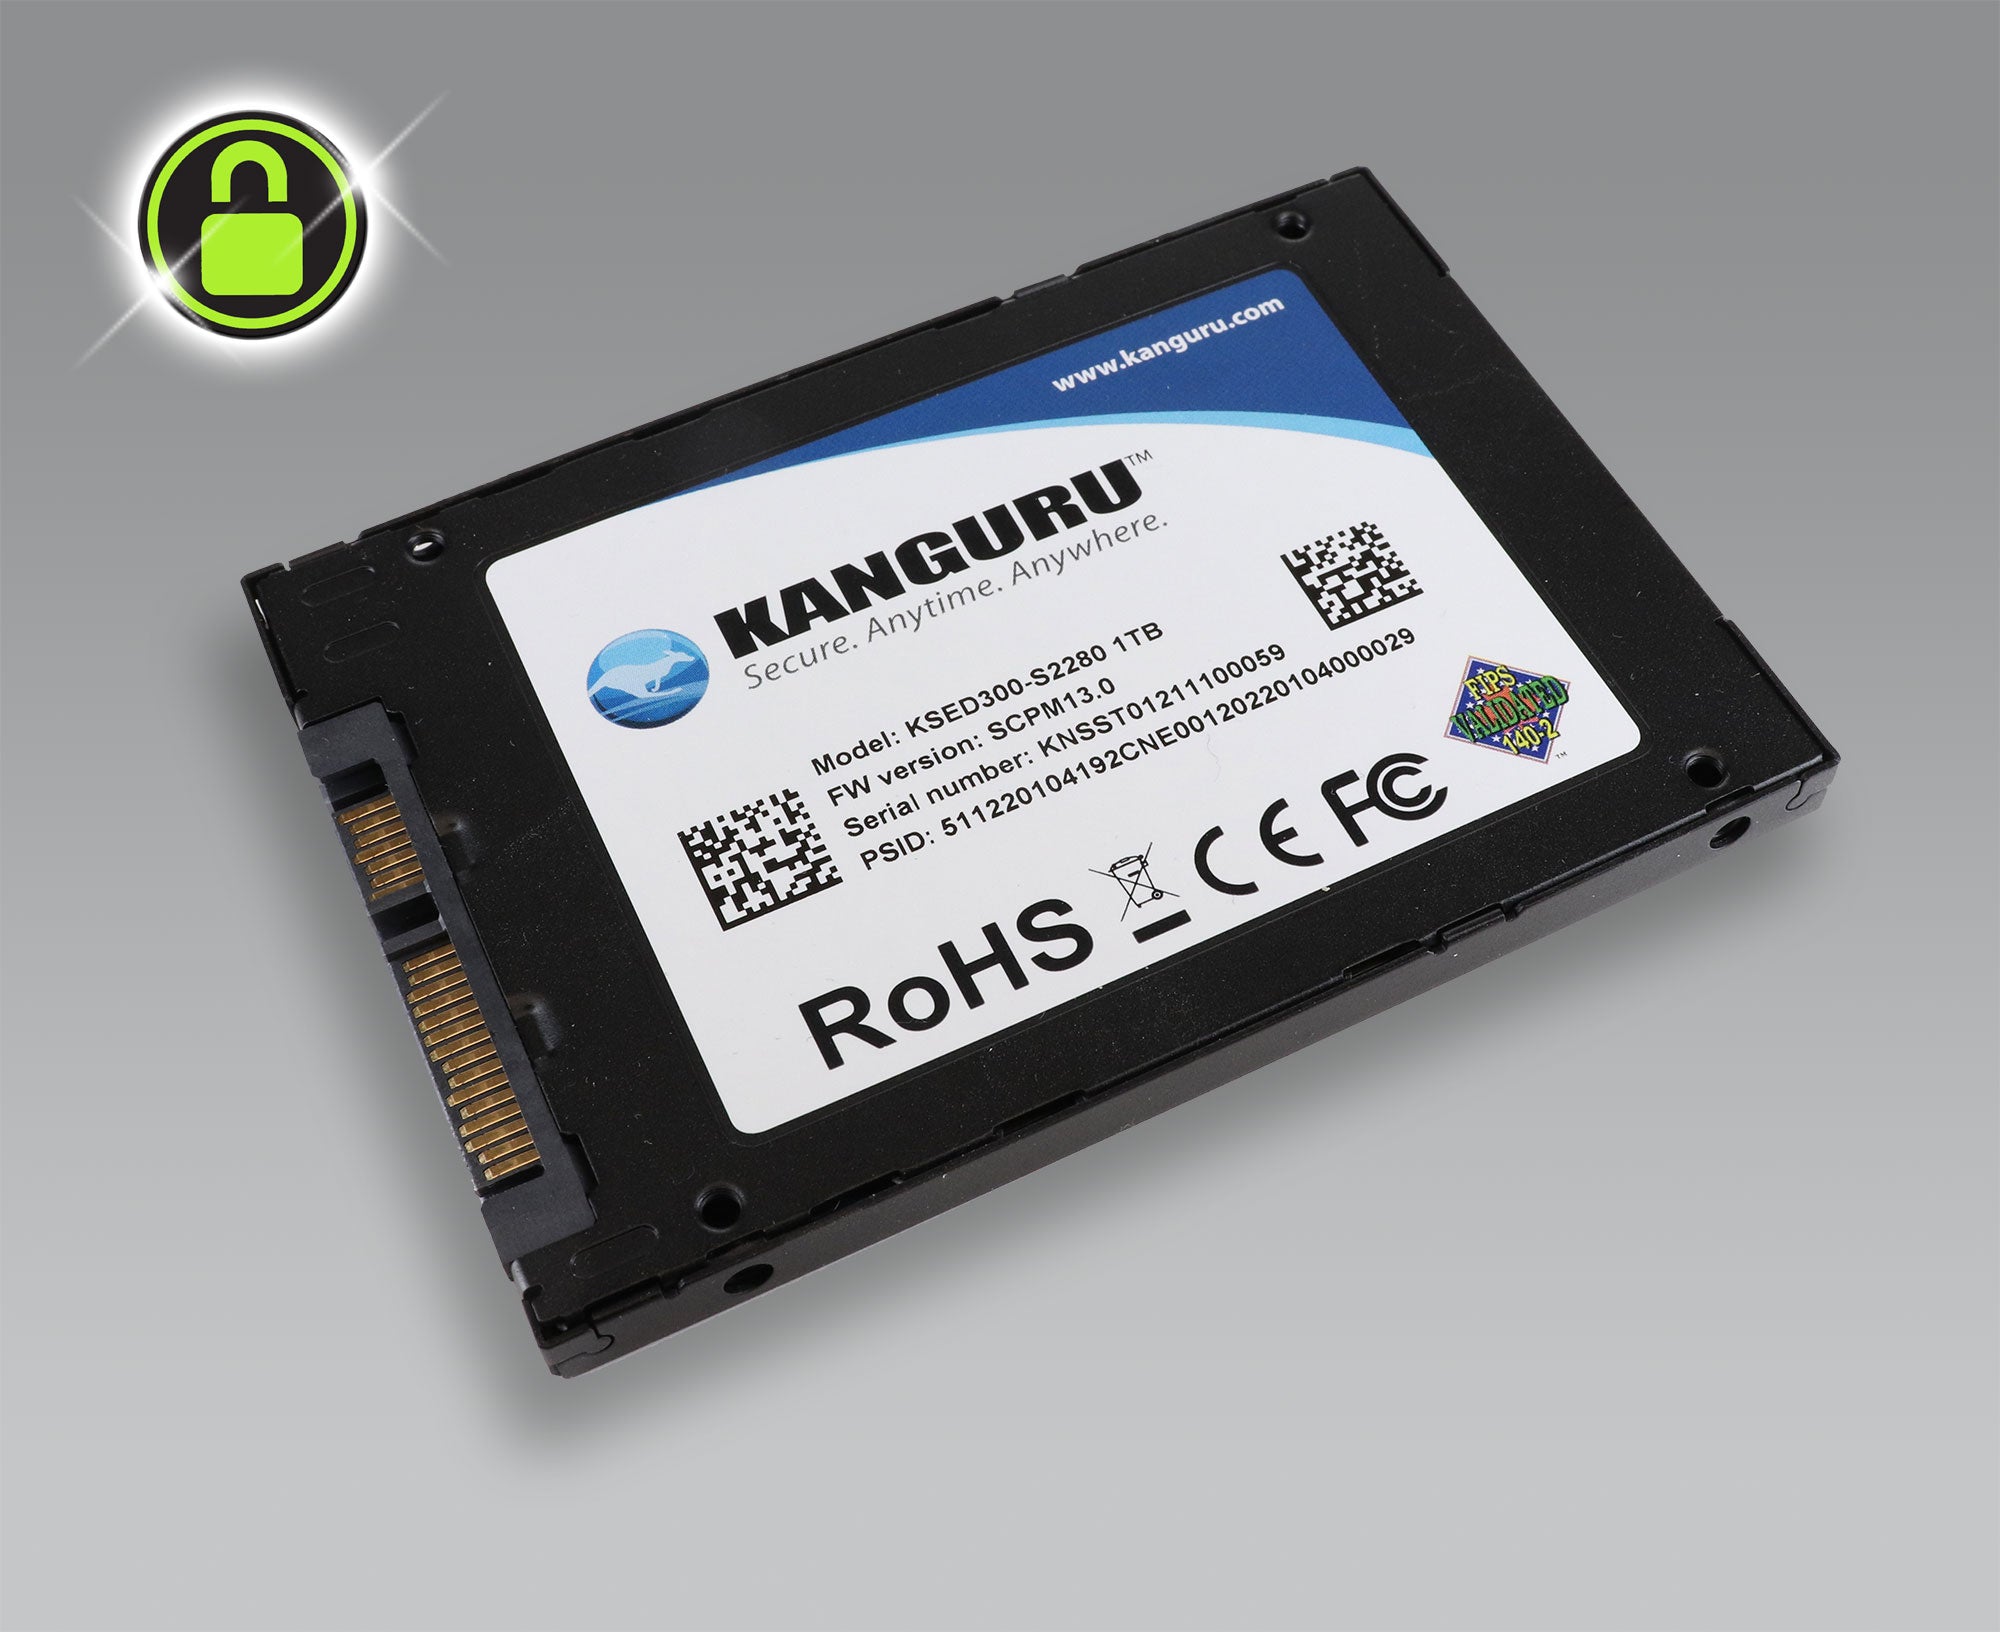 The Kanguru Opal SED300 FIPS 140-2 Certified, SATA 2.5" self-encrypting drive is ideal for SMBs, Enterprise, Corporate and Public Sector where user computer and data protection is critical.